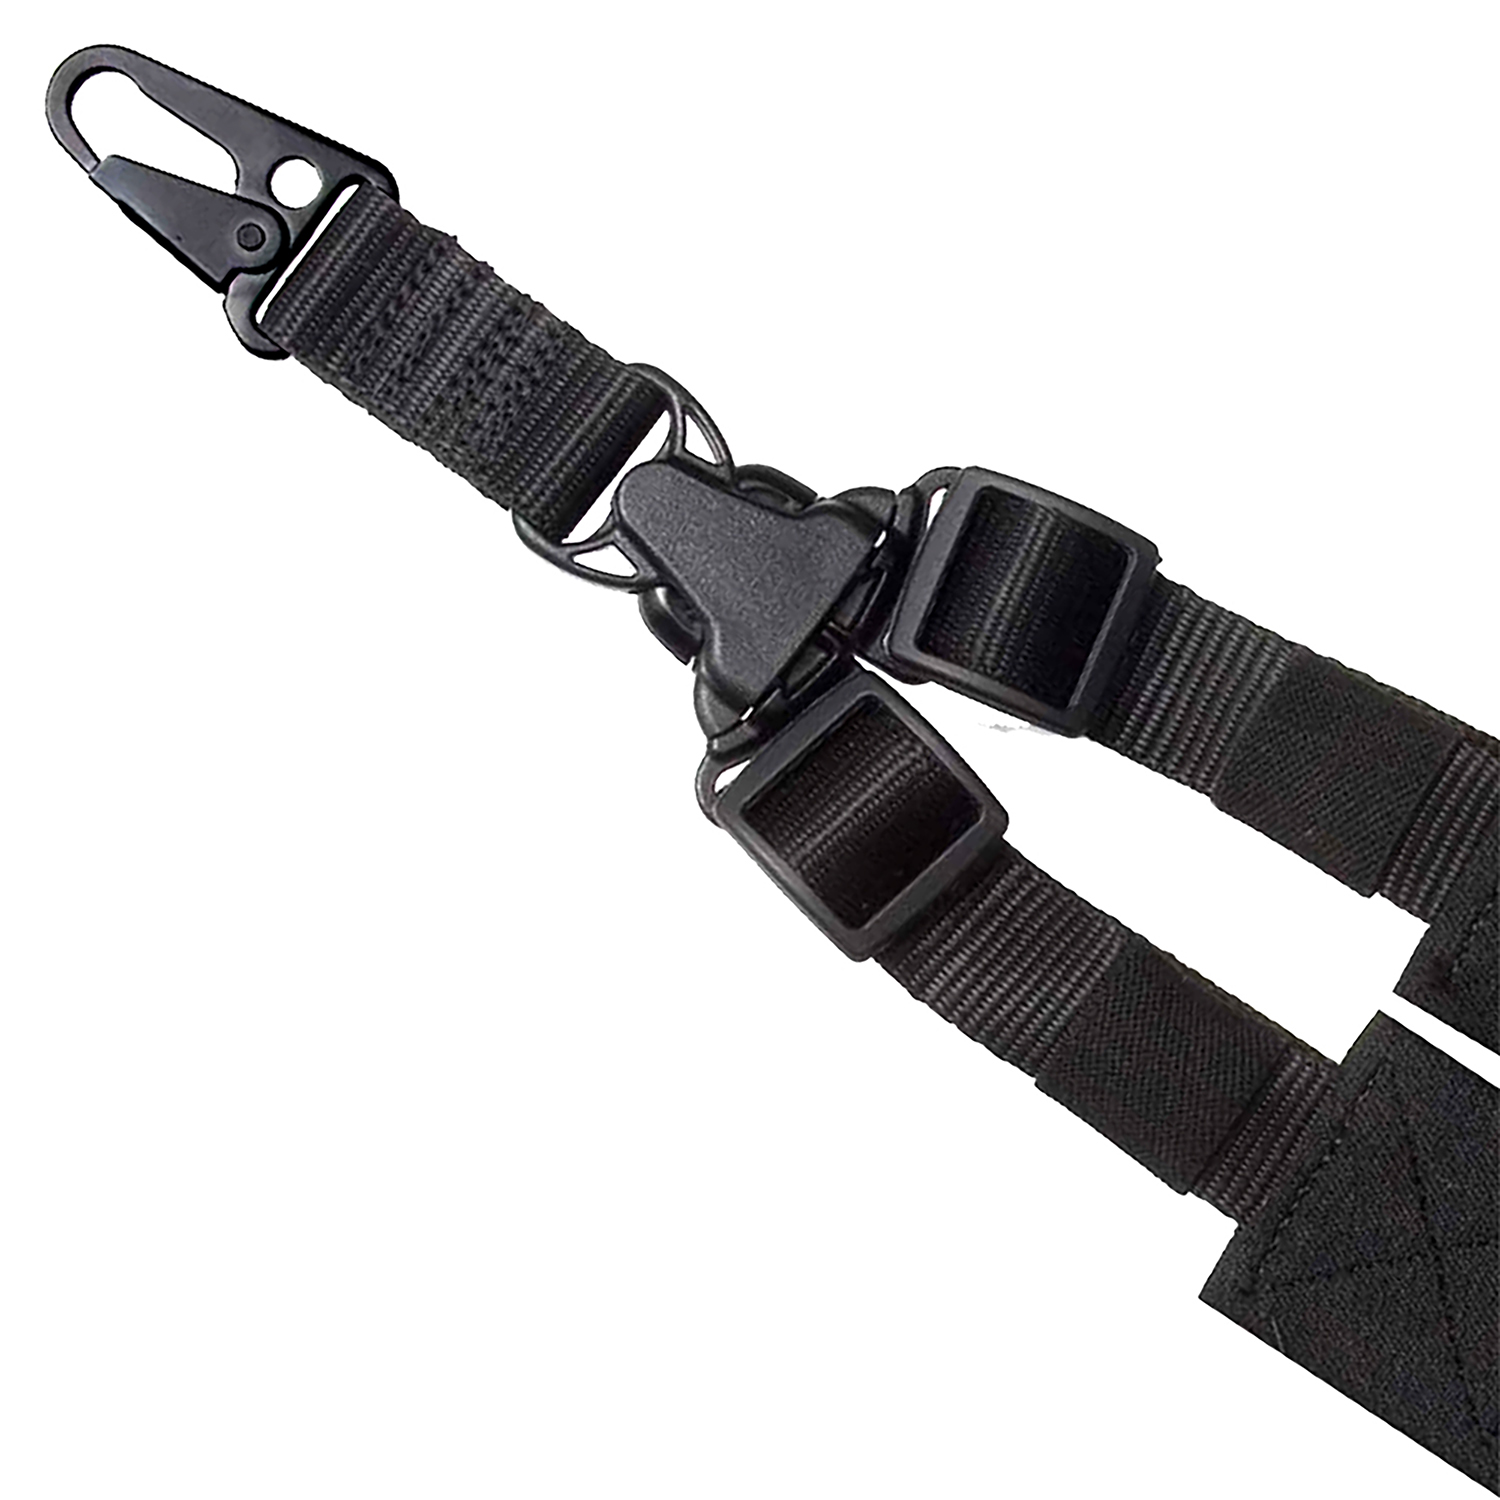 TOC TACTICAL SLING KIT SLING/ADAPTER/WRENCH